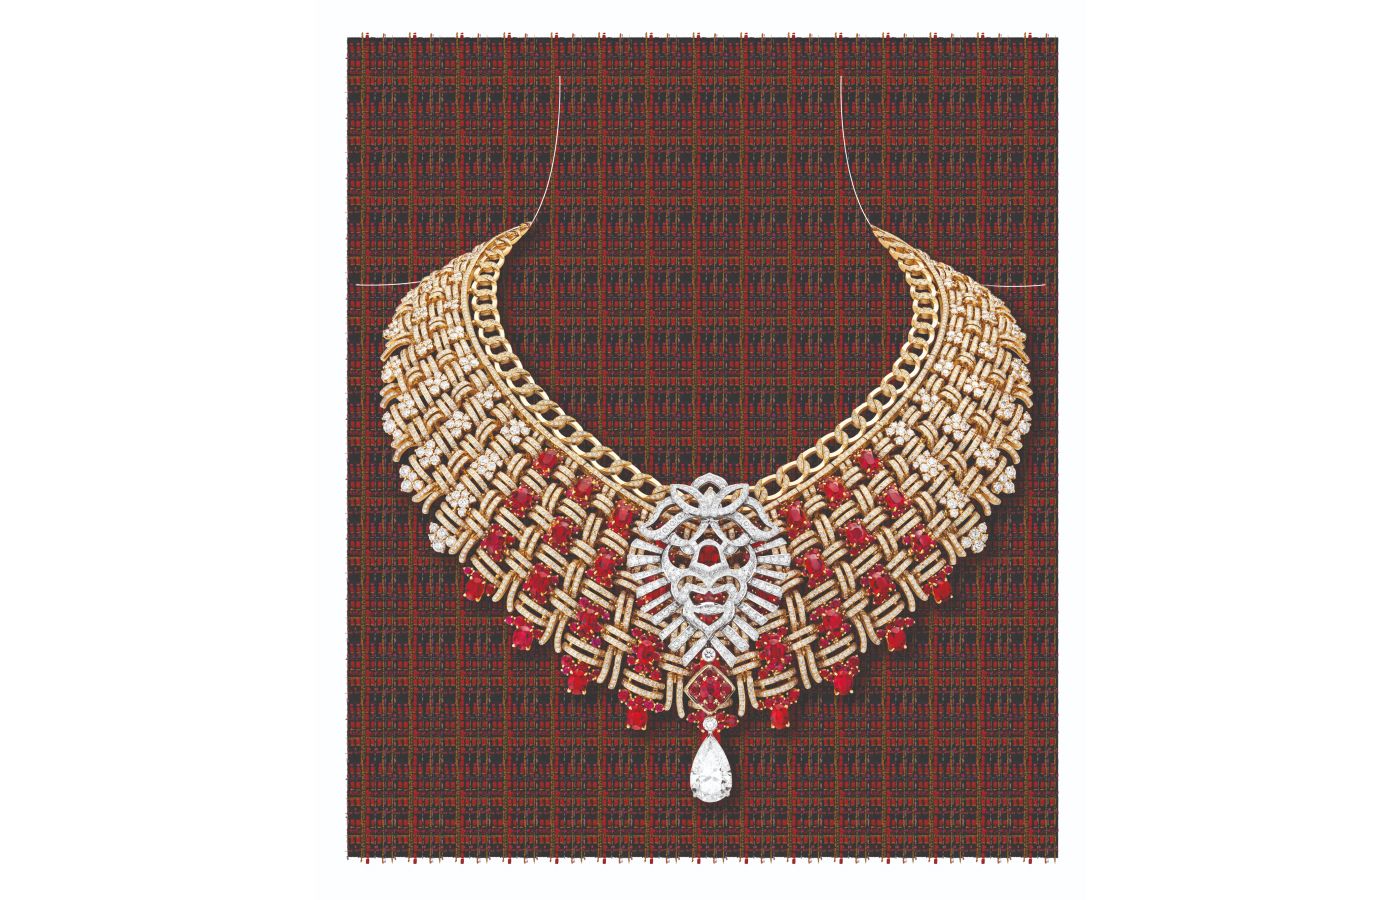 TWEED DE CHANEL” High Jewelry collection in London - ZOE Magazine